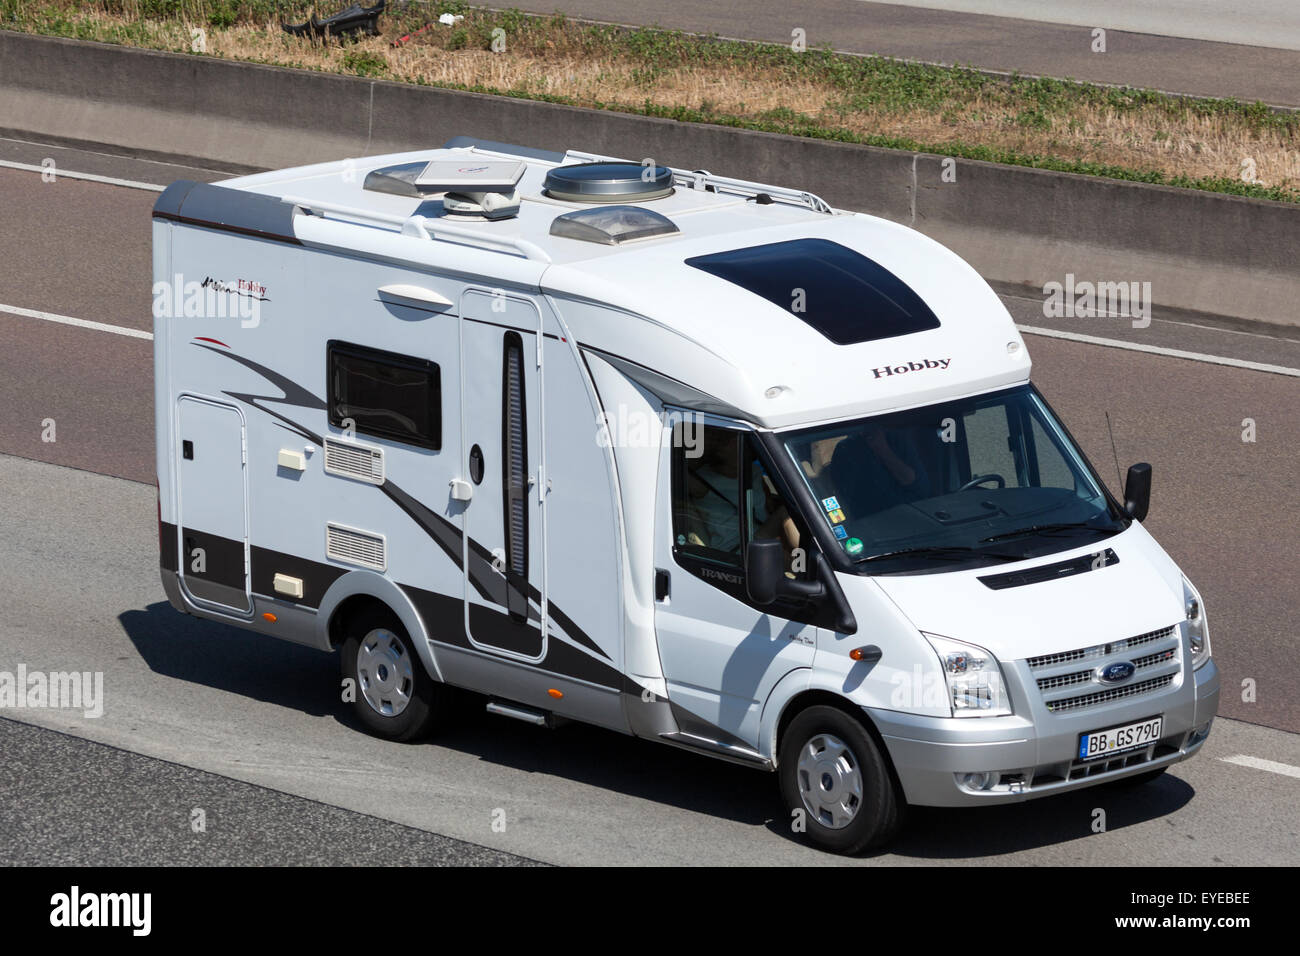 Ford Transit Hobby Mobile Home on the highway in Germany Stock Photo - Alamy